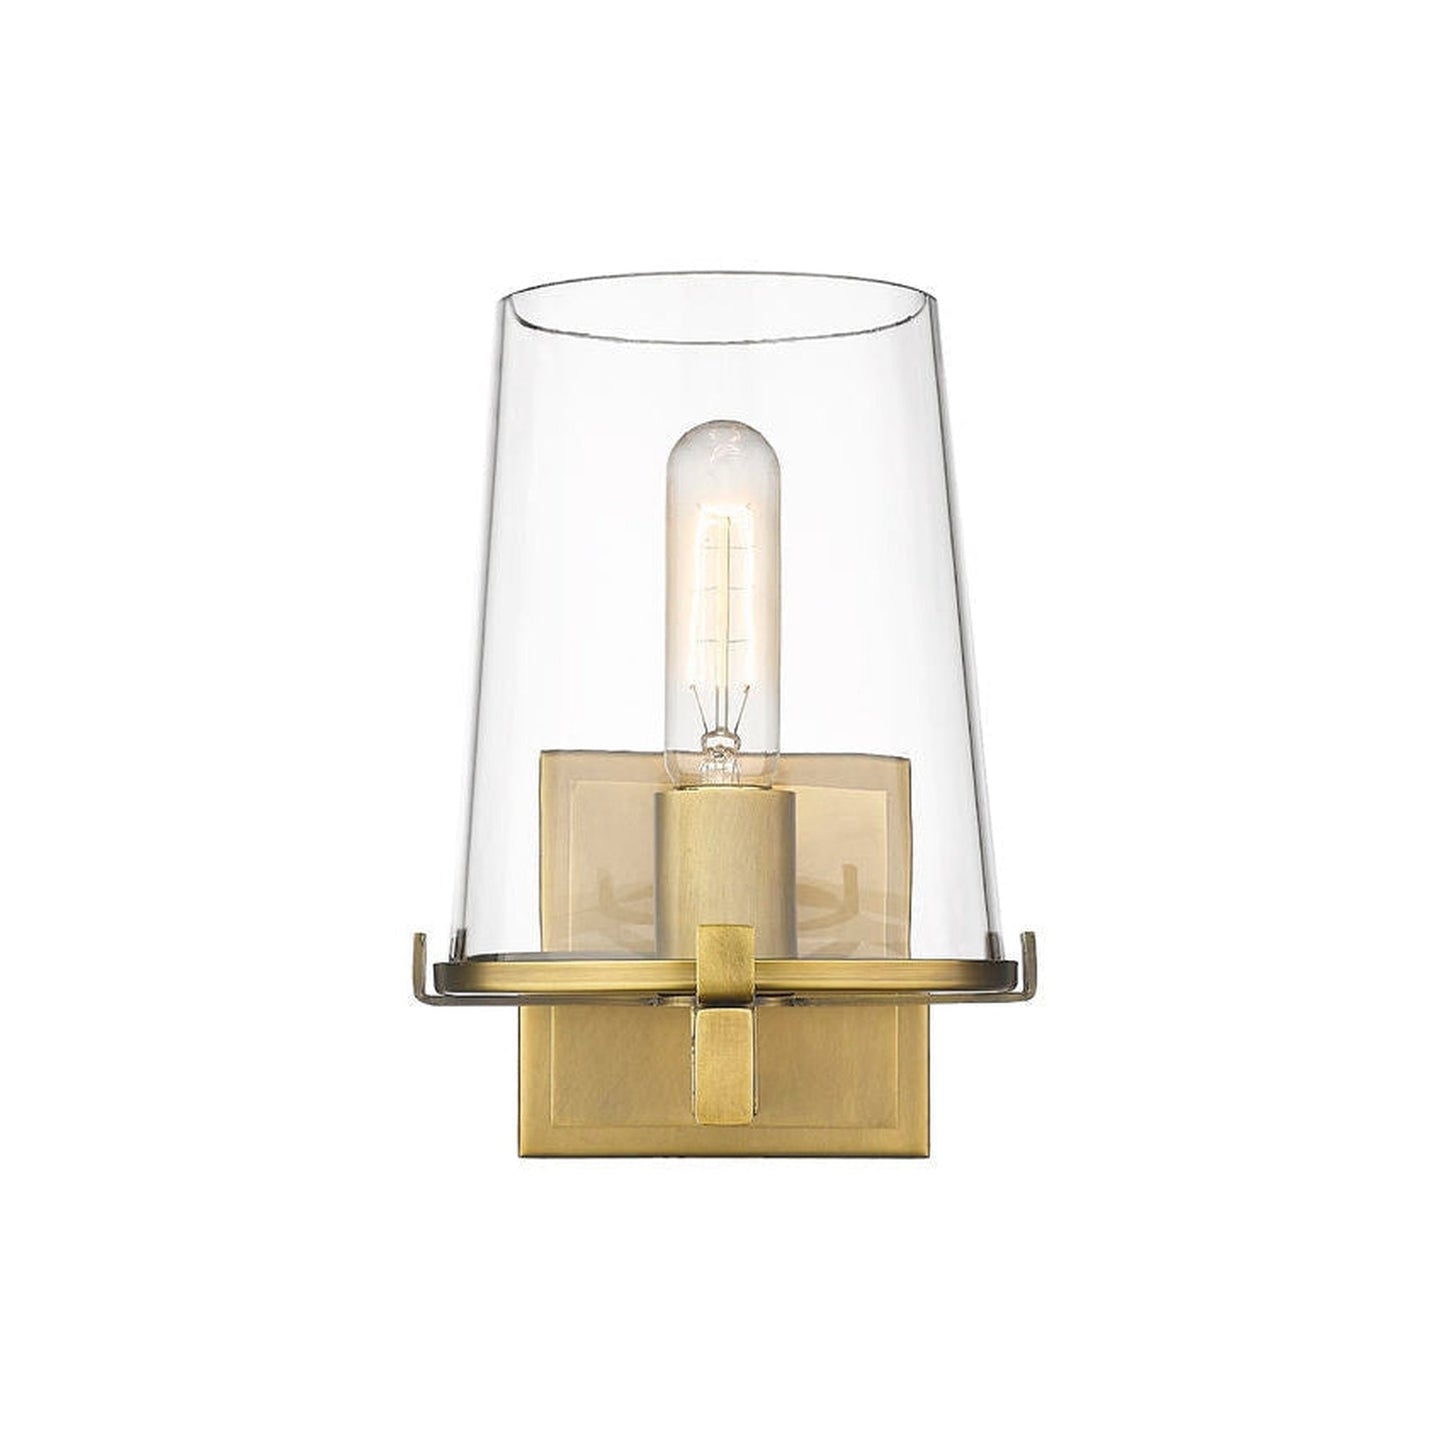 Z-Lite Callista 7" 1-Light Rubbed Brass Vanity Light With Clear Glass Shade